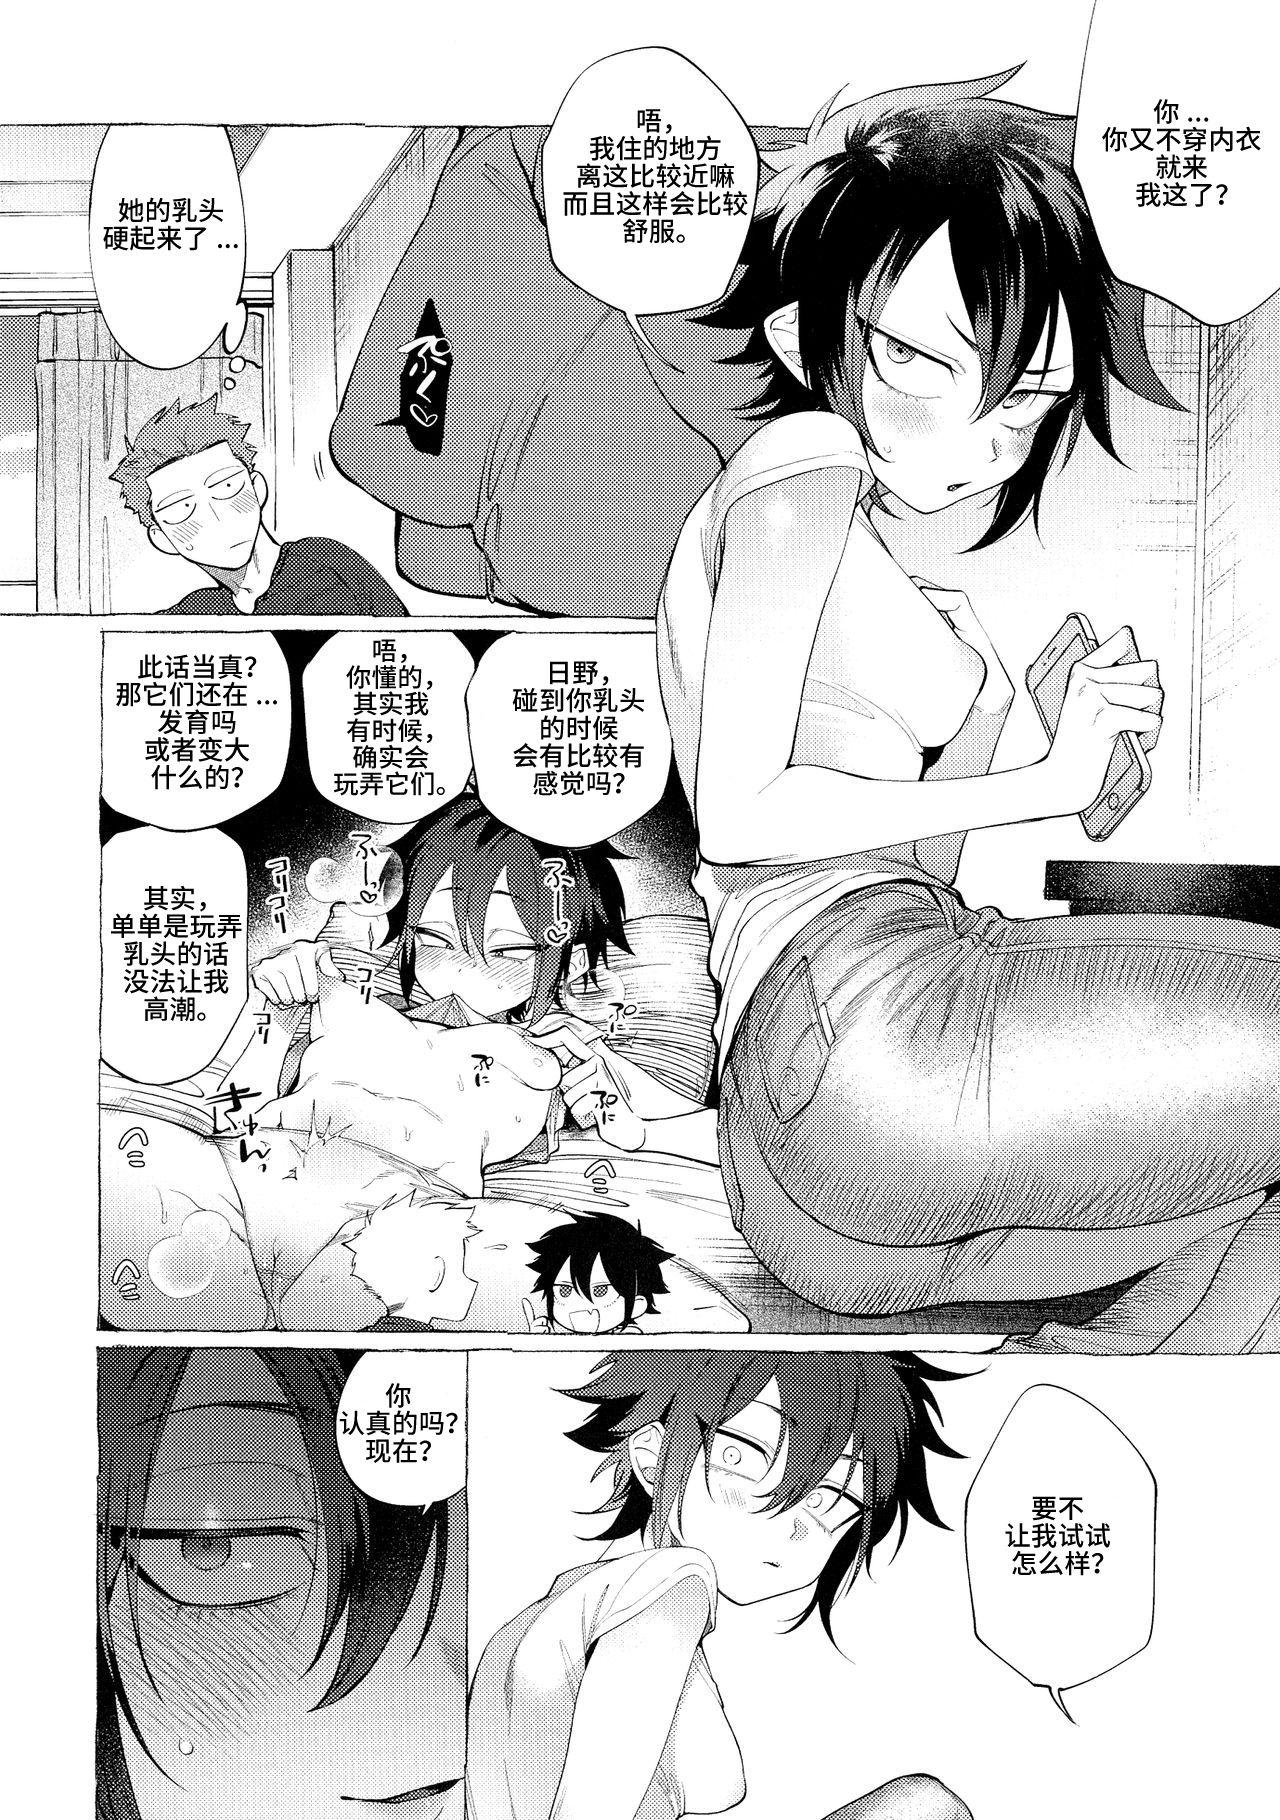 Black Isshuukan Friends Euro Porn - Page 2